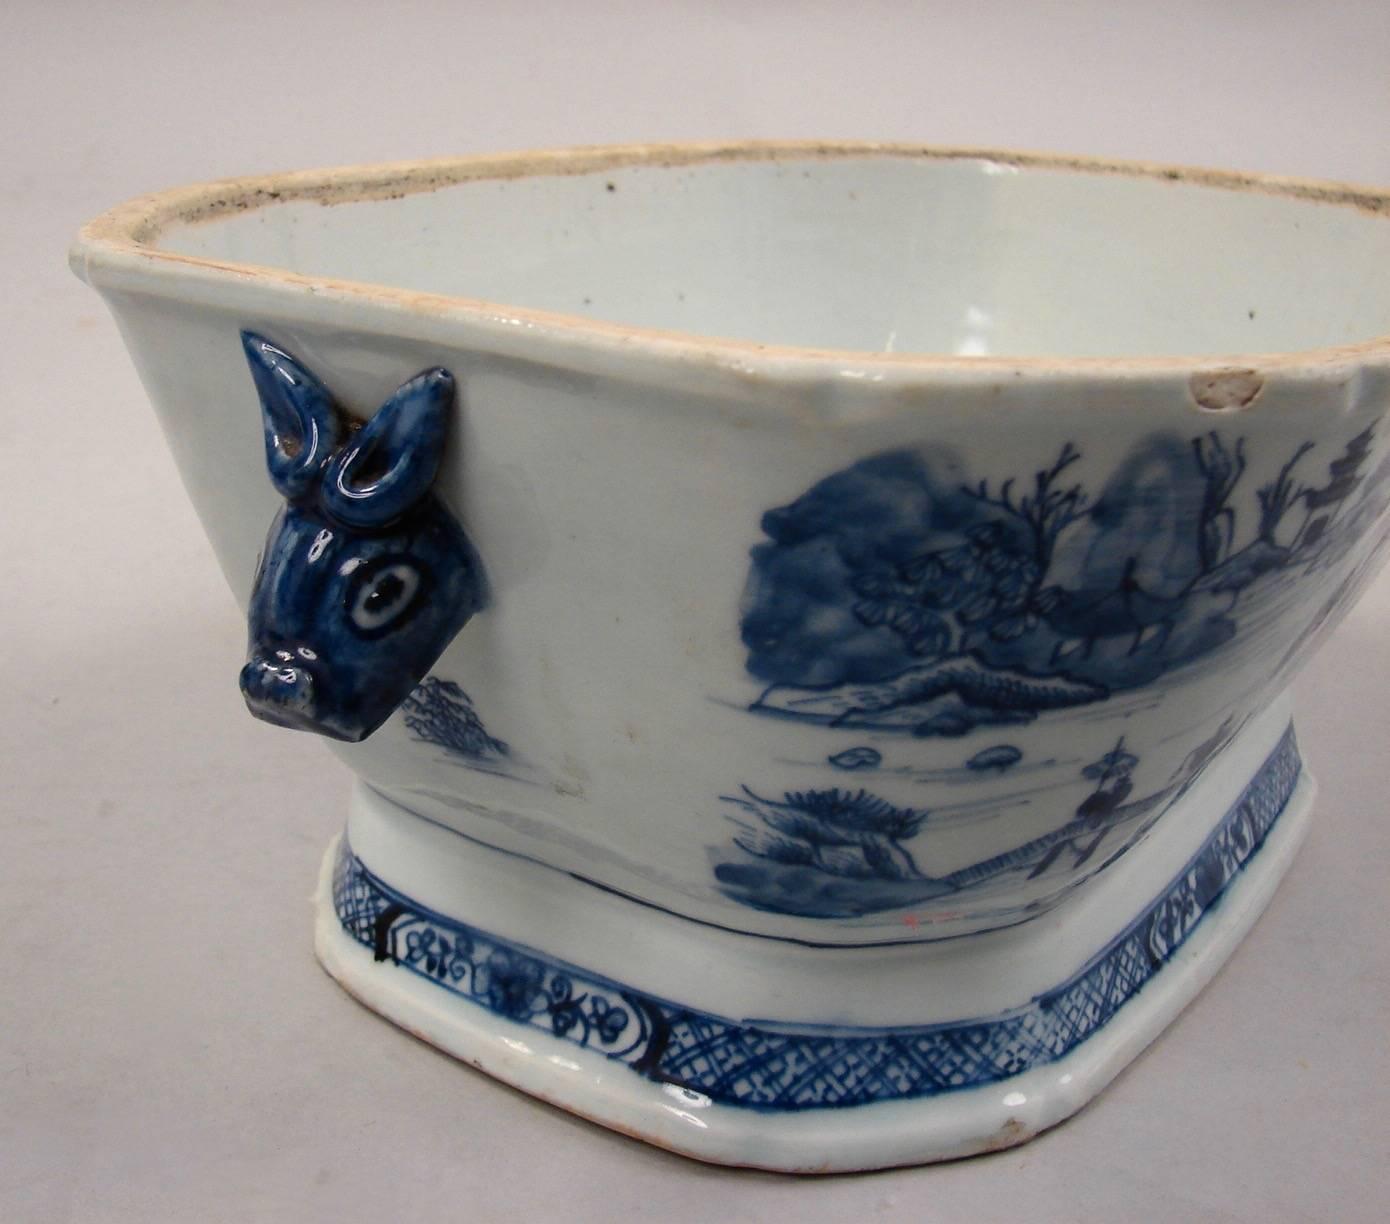 A good Chinese export Canton blue and white soup tureen and cover decorated overall with figures, trees and structures in a river setting, on an associated underplate, the tureen with boar's head handles, circa 1850.